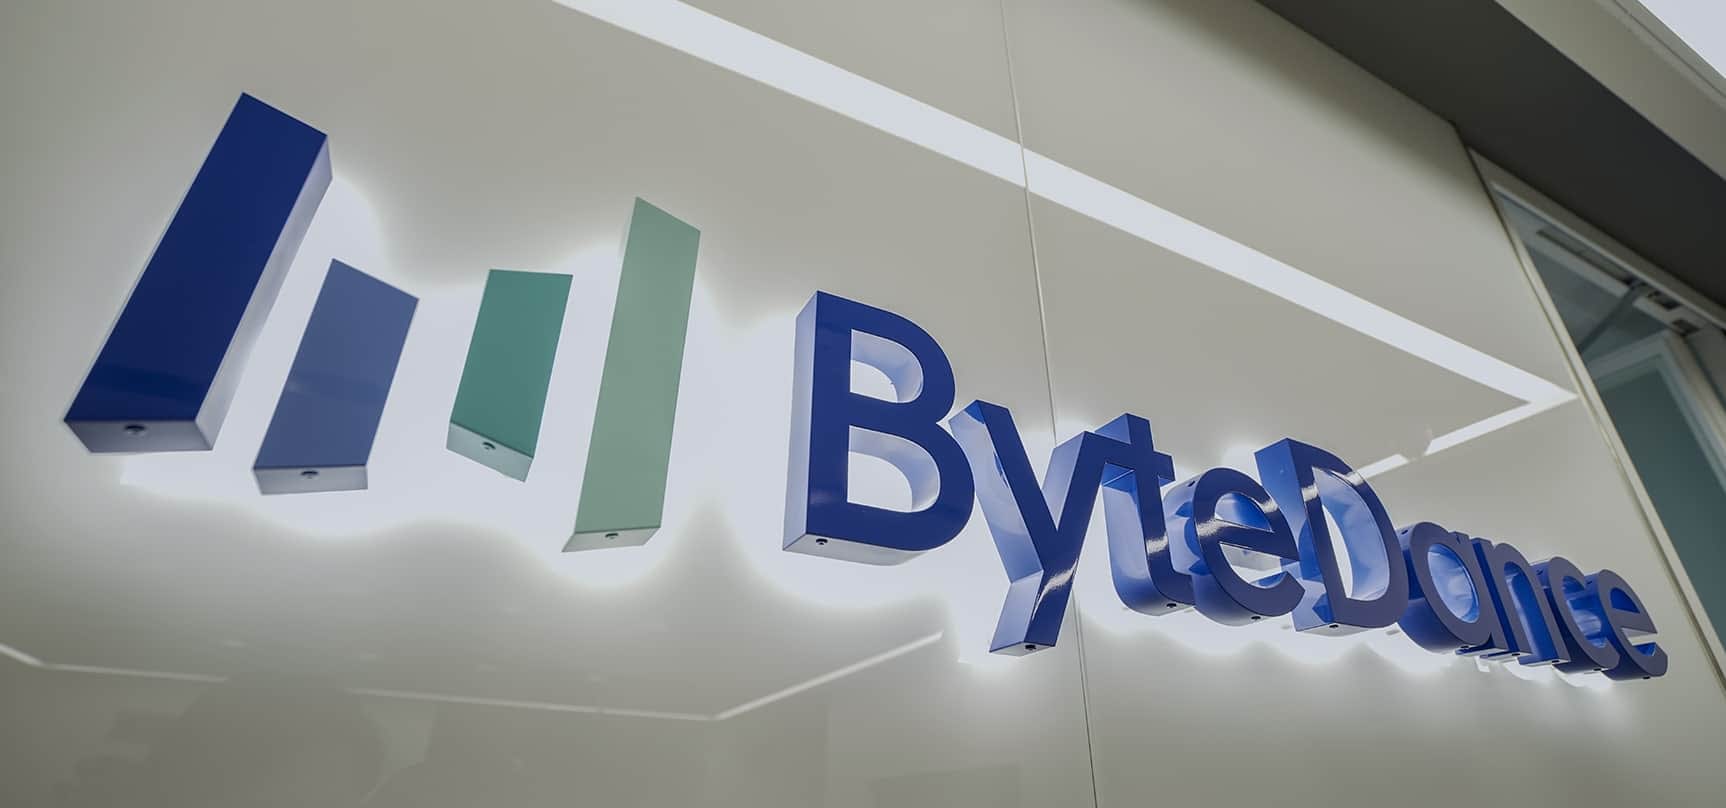 One of the China tech giants, Bytedance